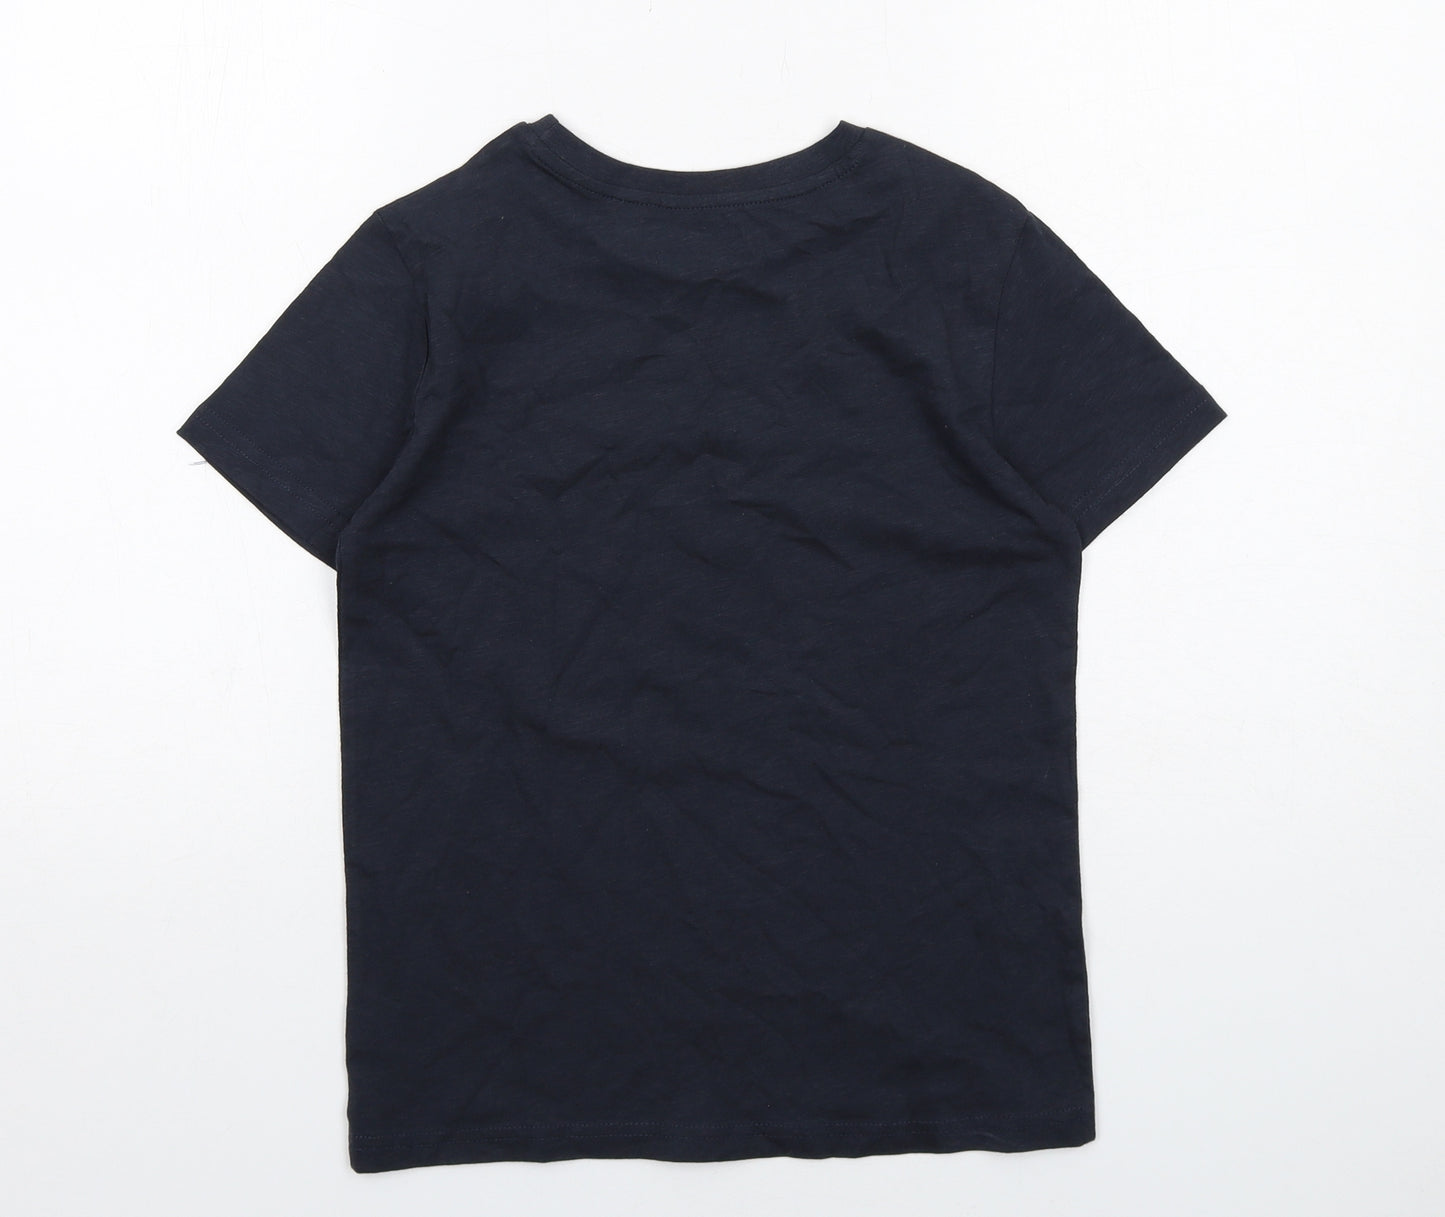 NEXT Boys Blue Cotton Basic T-Shirt Size 9 Years Round Neck Pullover